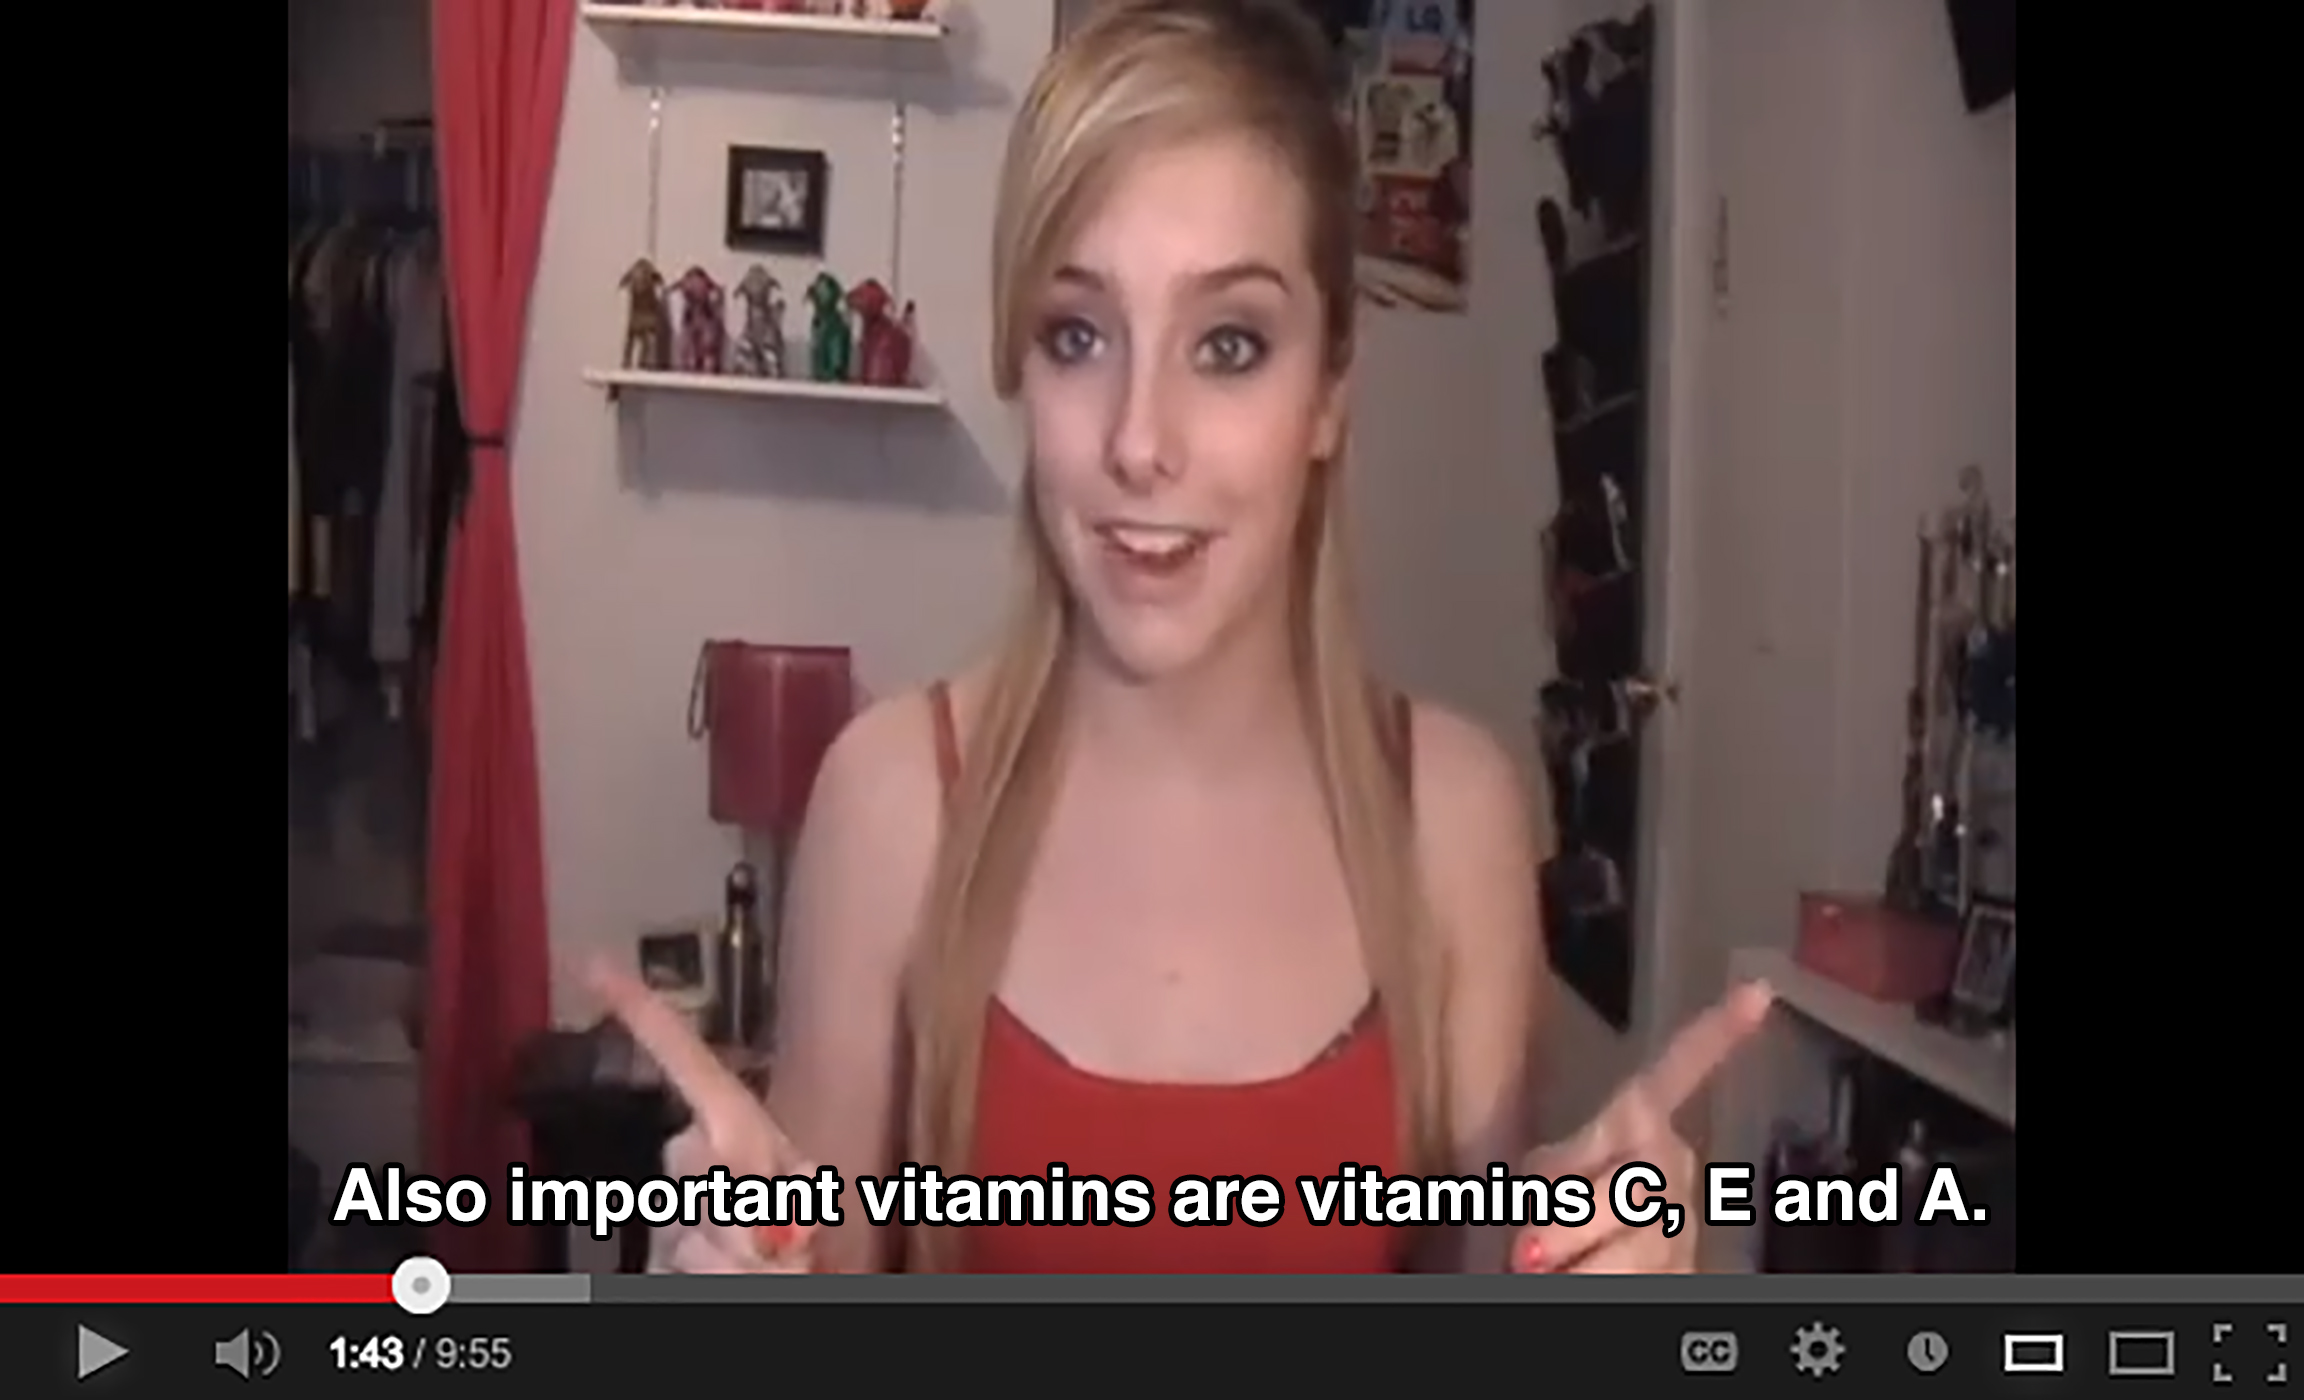 A teenager in a bedroom gestures with both index fingers and says: Also important vitamins are vitamins C, E, and A.